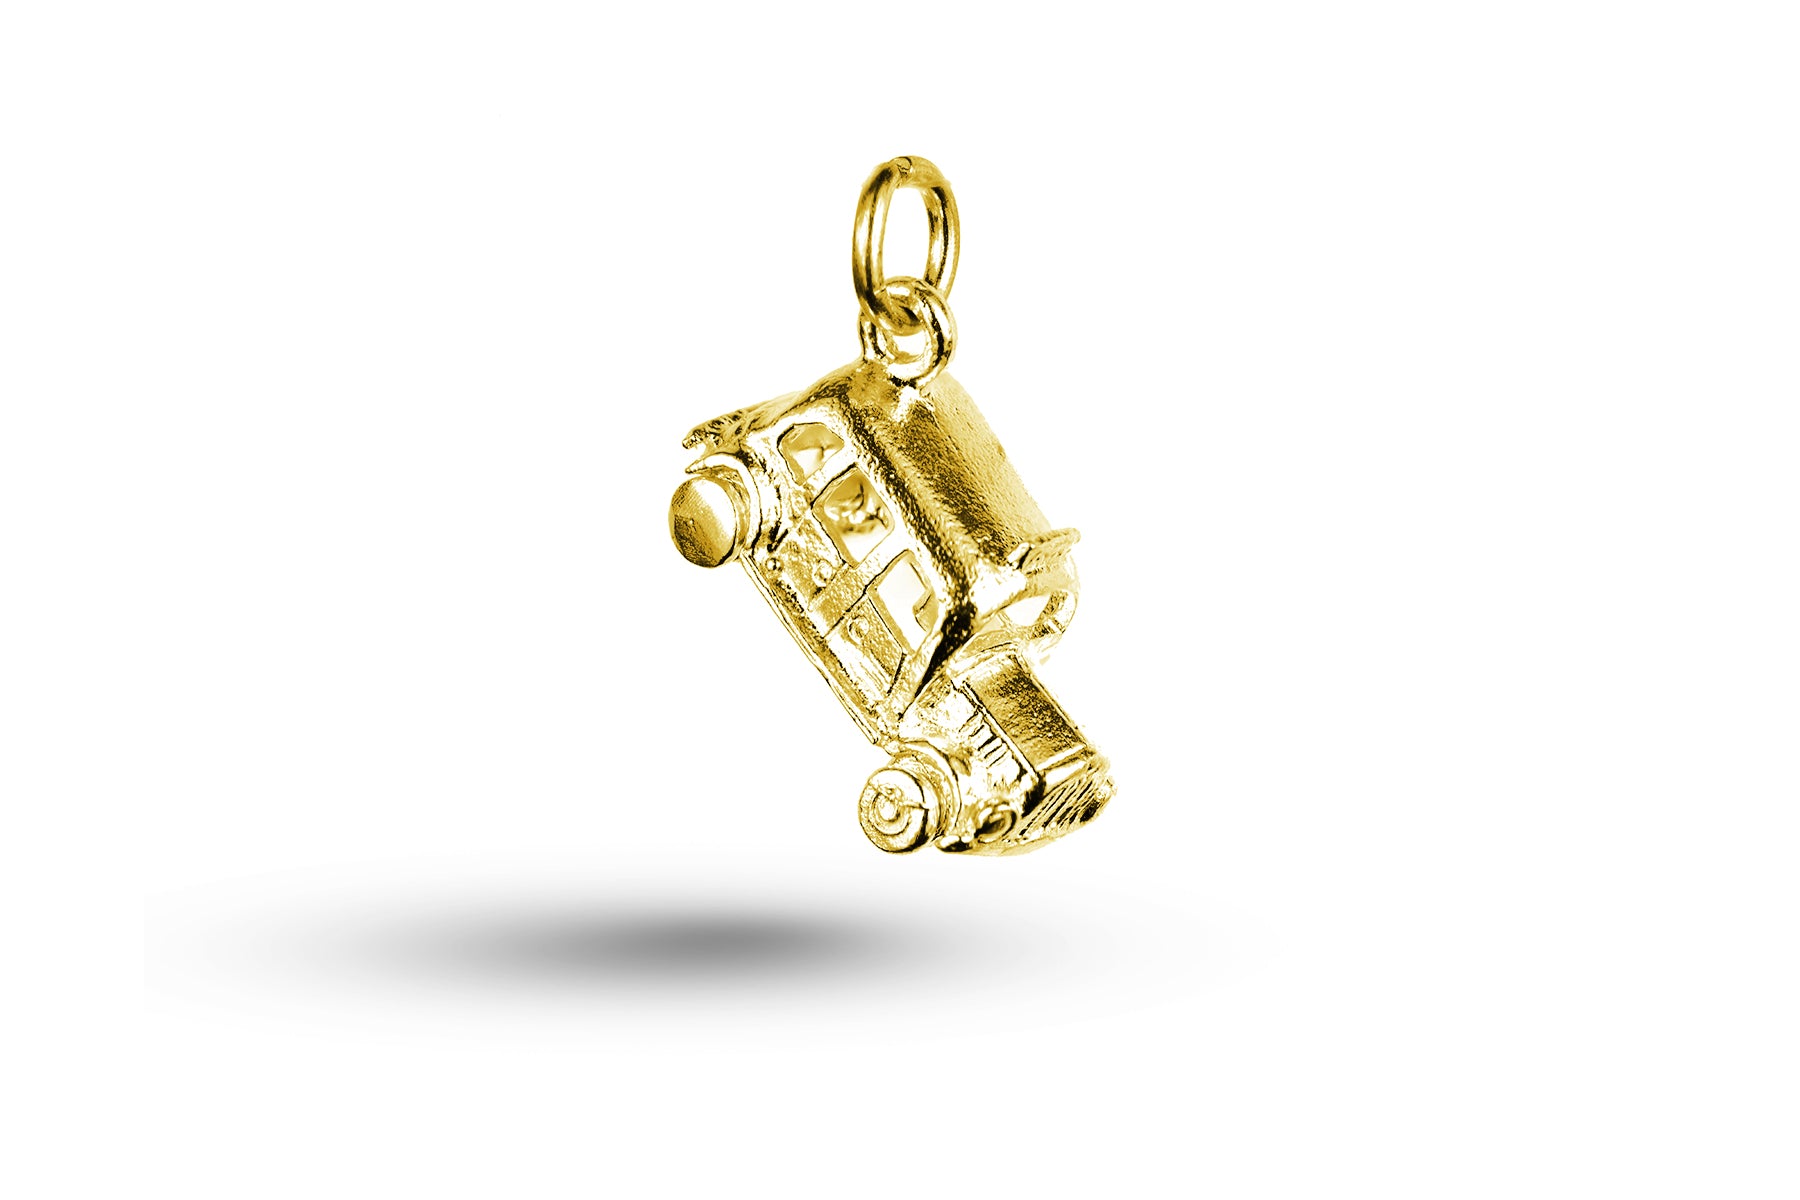 Yellow gold London Taxi Cab charm.